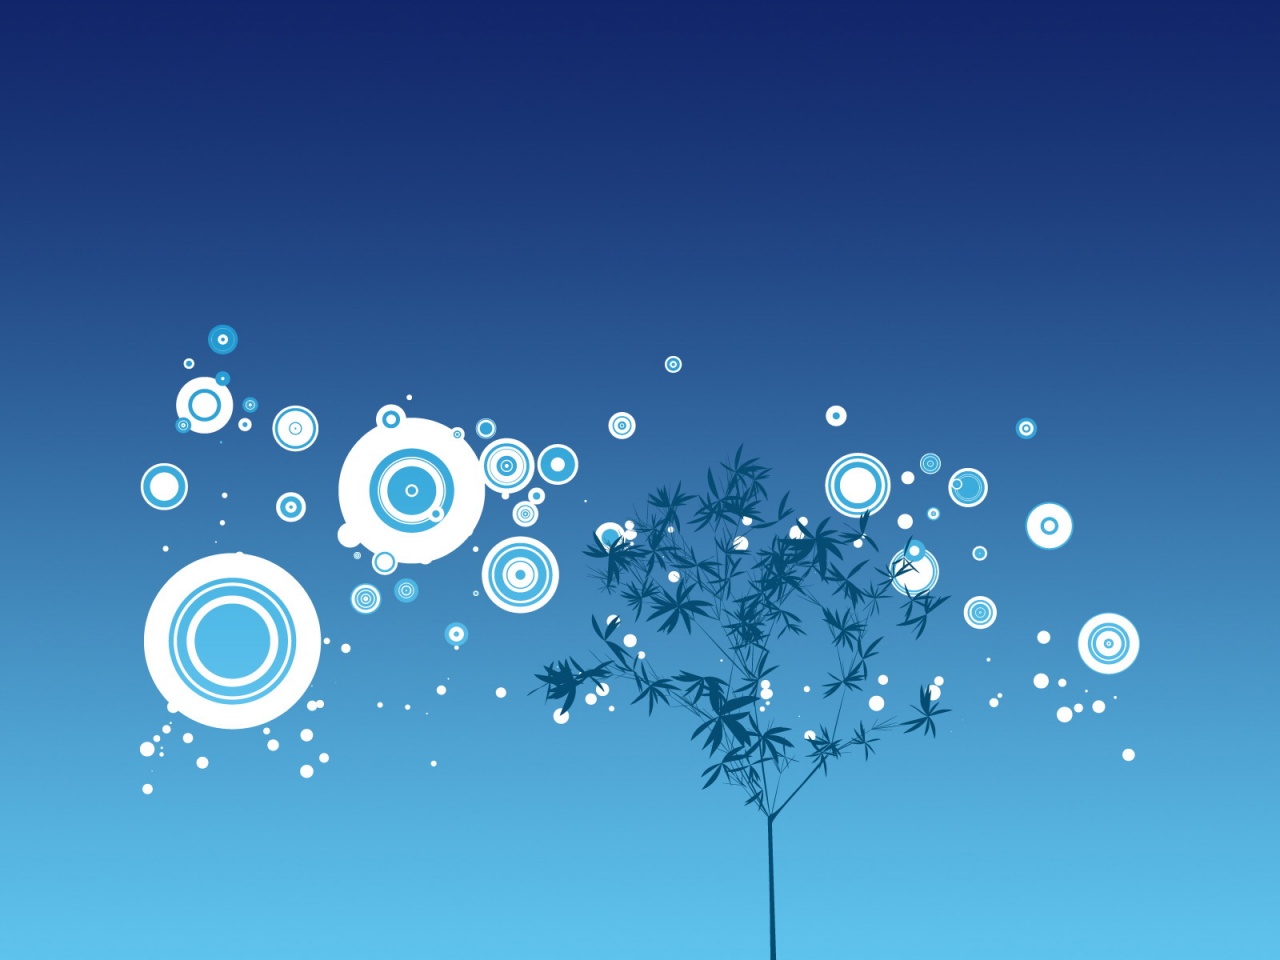 abstract wallpapers hd blue vector